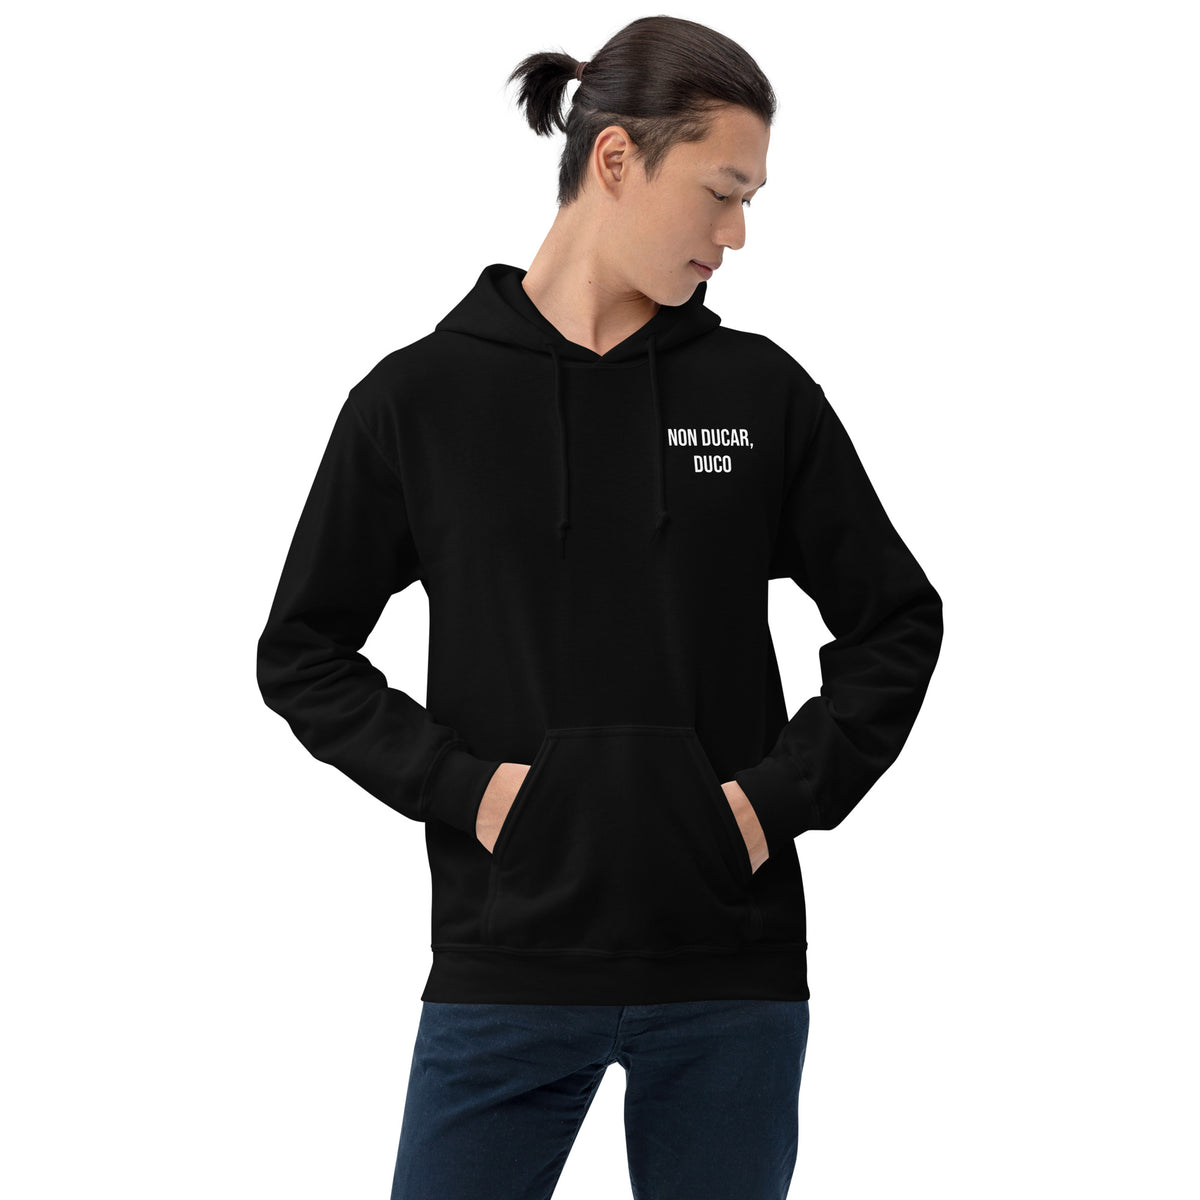 Te Futueo Et Caballum Tuum (Screw you, and the horse you rode in on) Unisex Hoodie